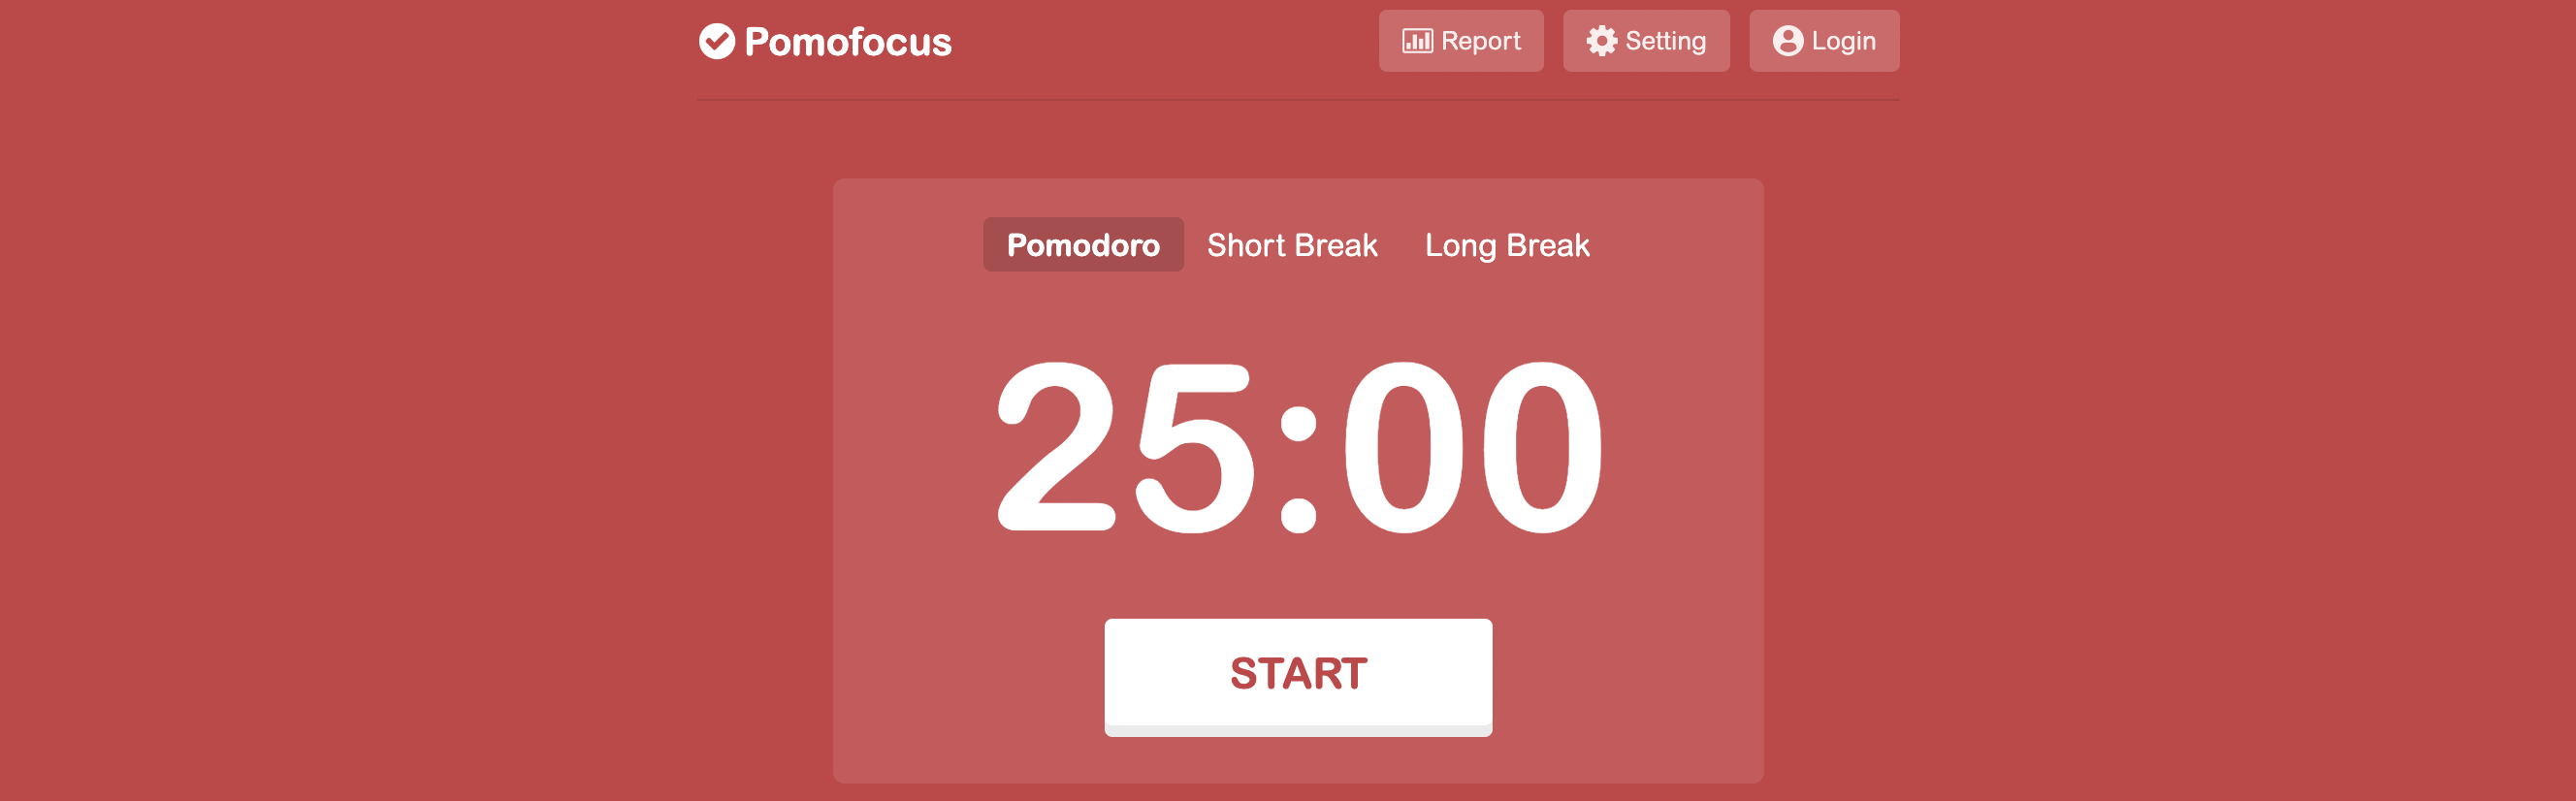 4 Best Pomodoro Timer Apps to Increase Productivity